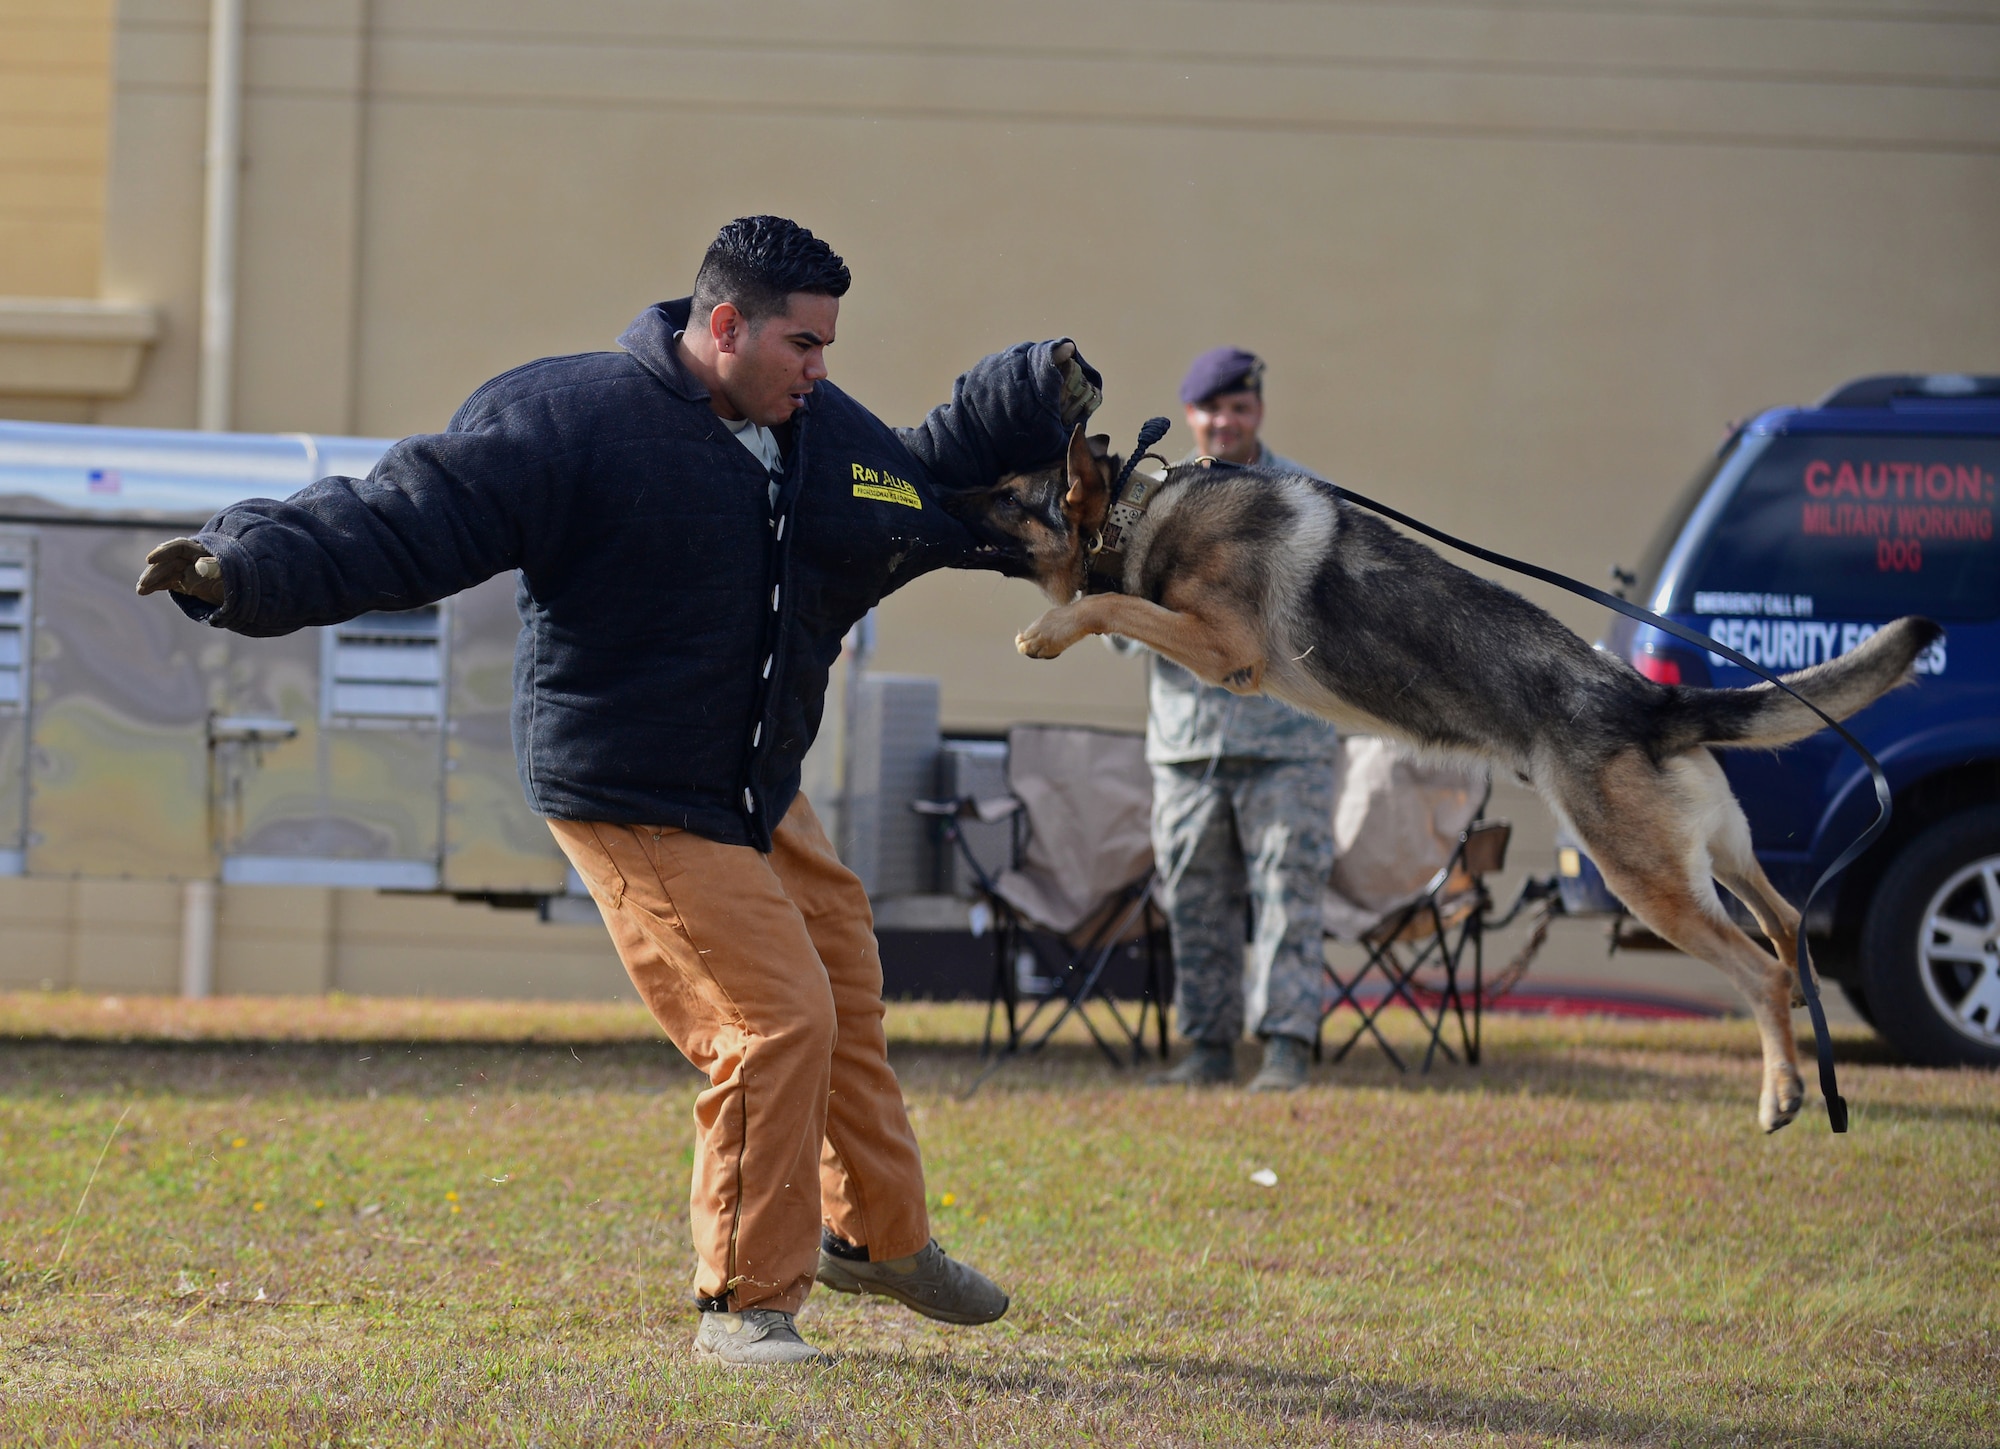 Staff Sgt. Adrian Chavez, 36th Security Forces Squadron military working dog handler, demonstrates how a dog apprehends a perpetrator May 17, 2016, at Andersen Air Force Base, Guam. Airmen from the 36th and 736th Security Forces Squadrons and Air Force Office of Special Investigations Det. 602 displayed their gear and skillsets to Andersen students during Police Week. (U.S. Air Force photo by Senior Airman Joshua Smoot)